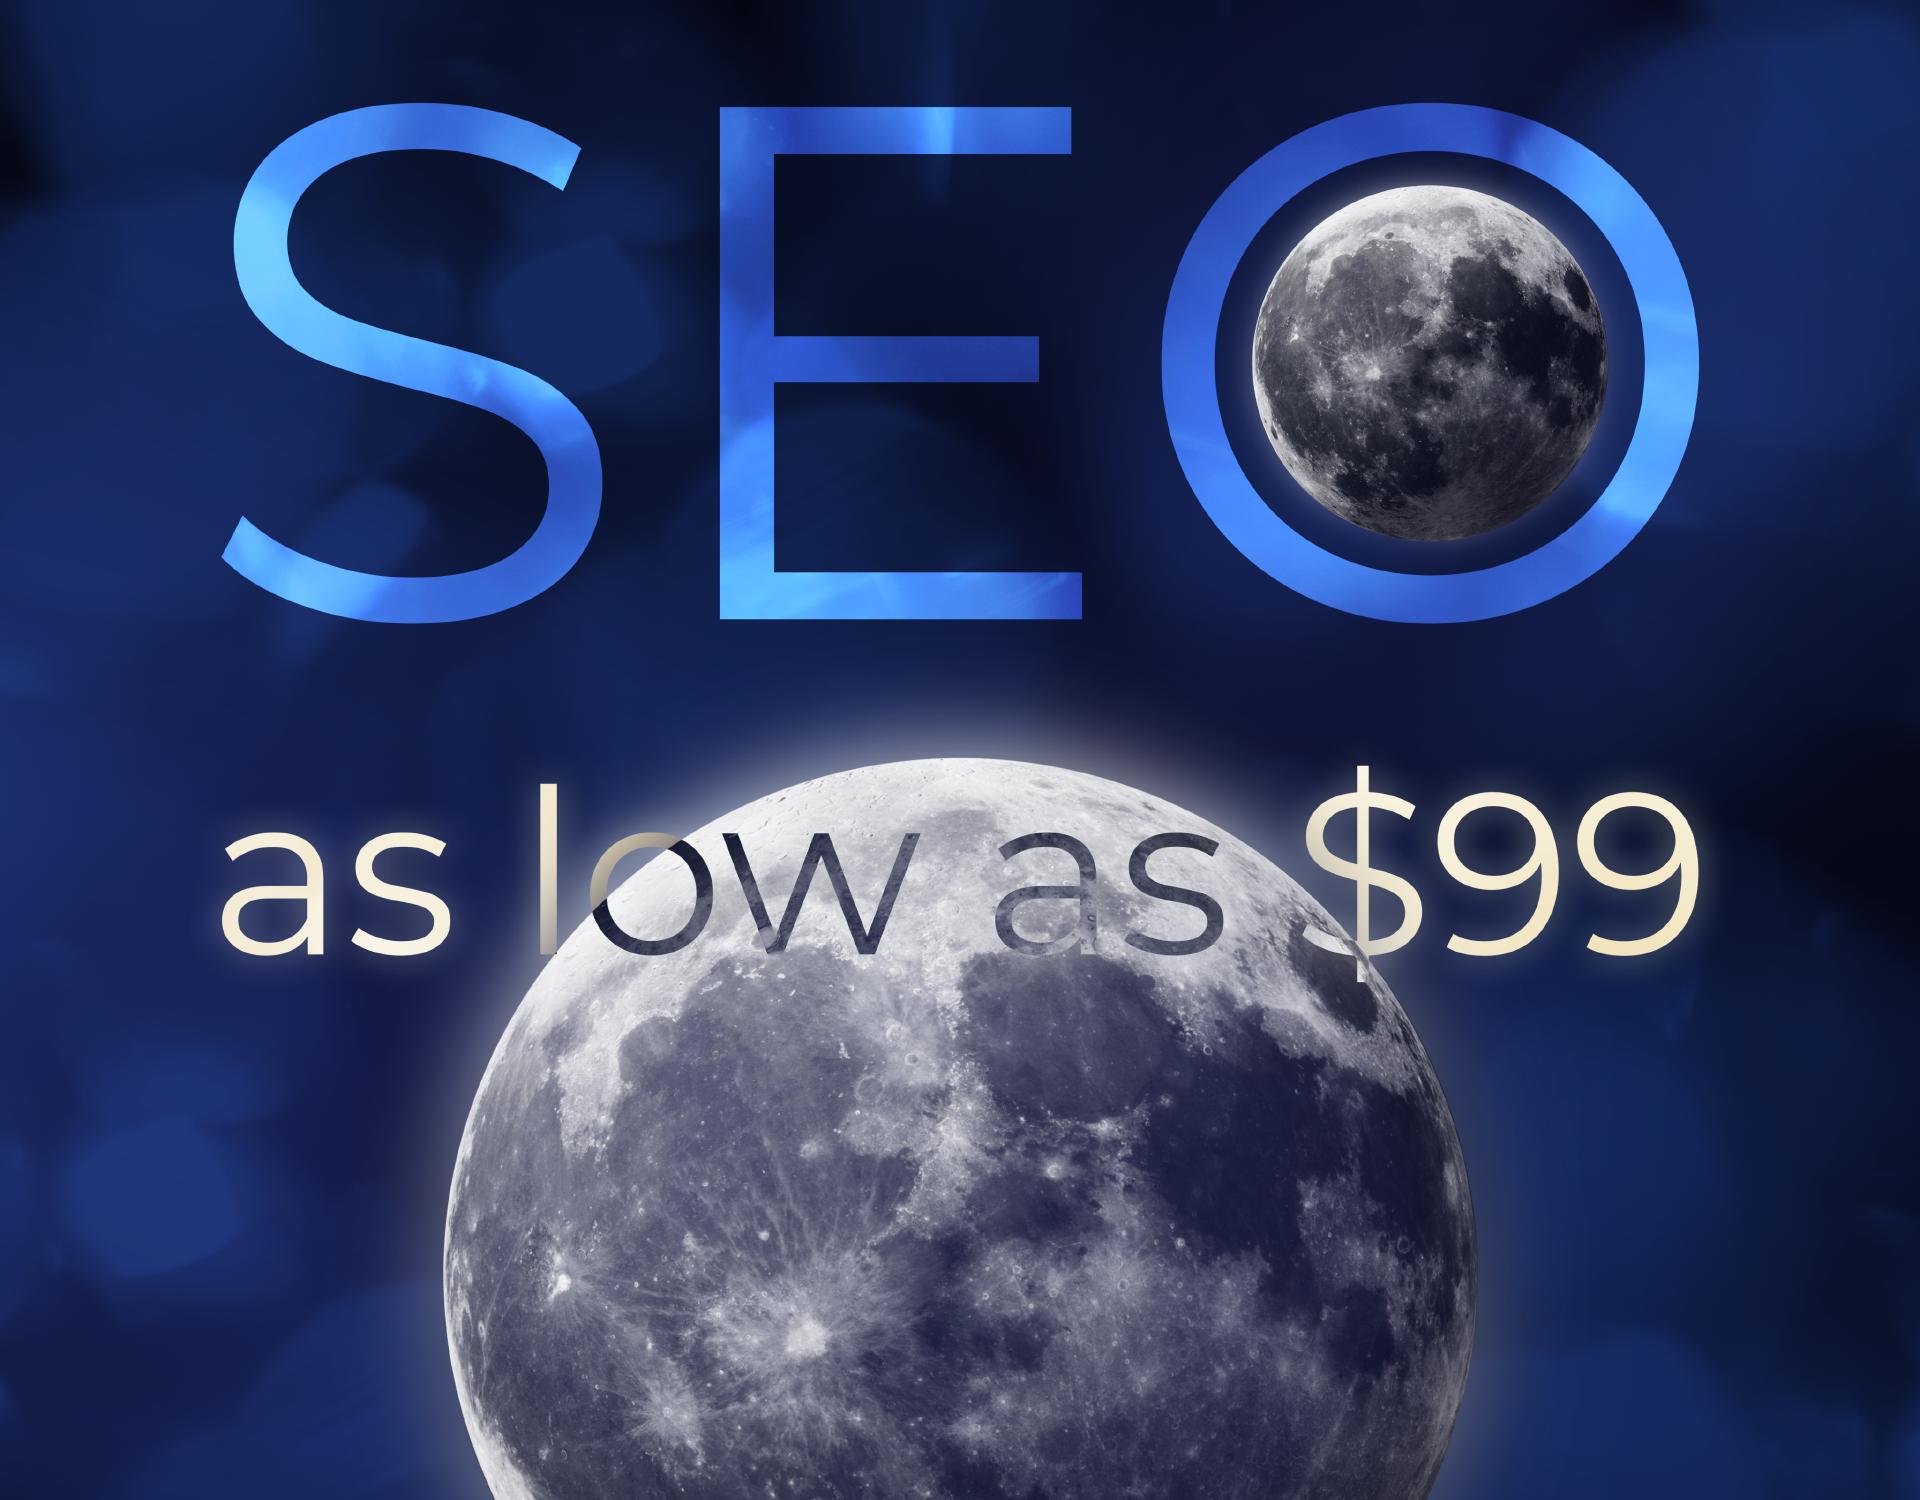 SEO as low as $99